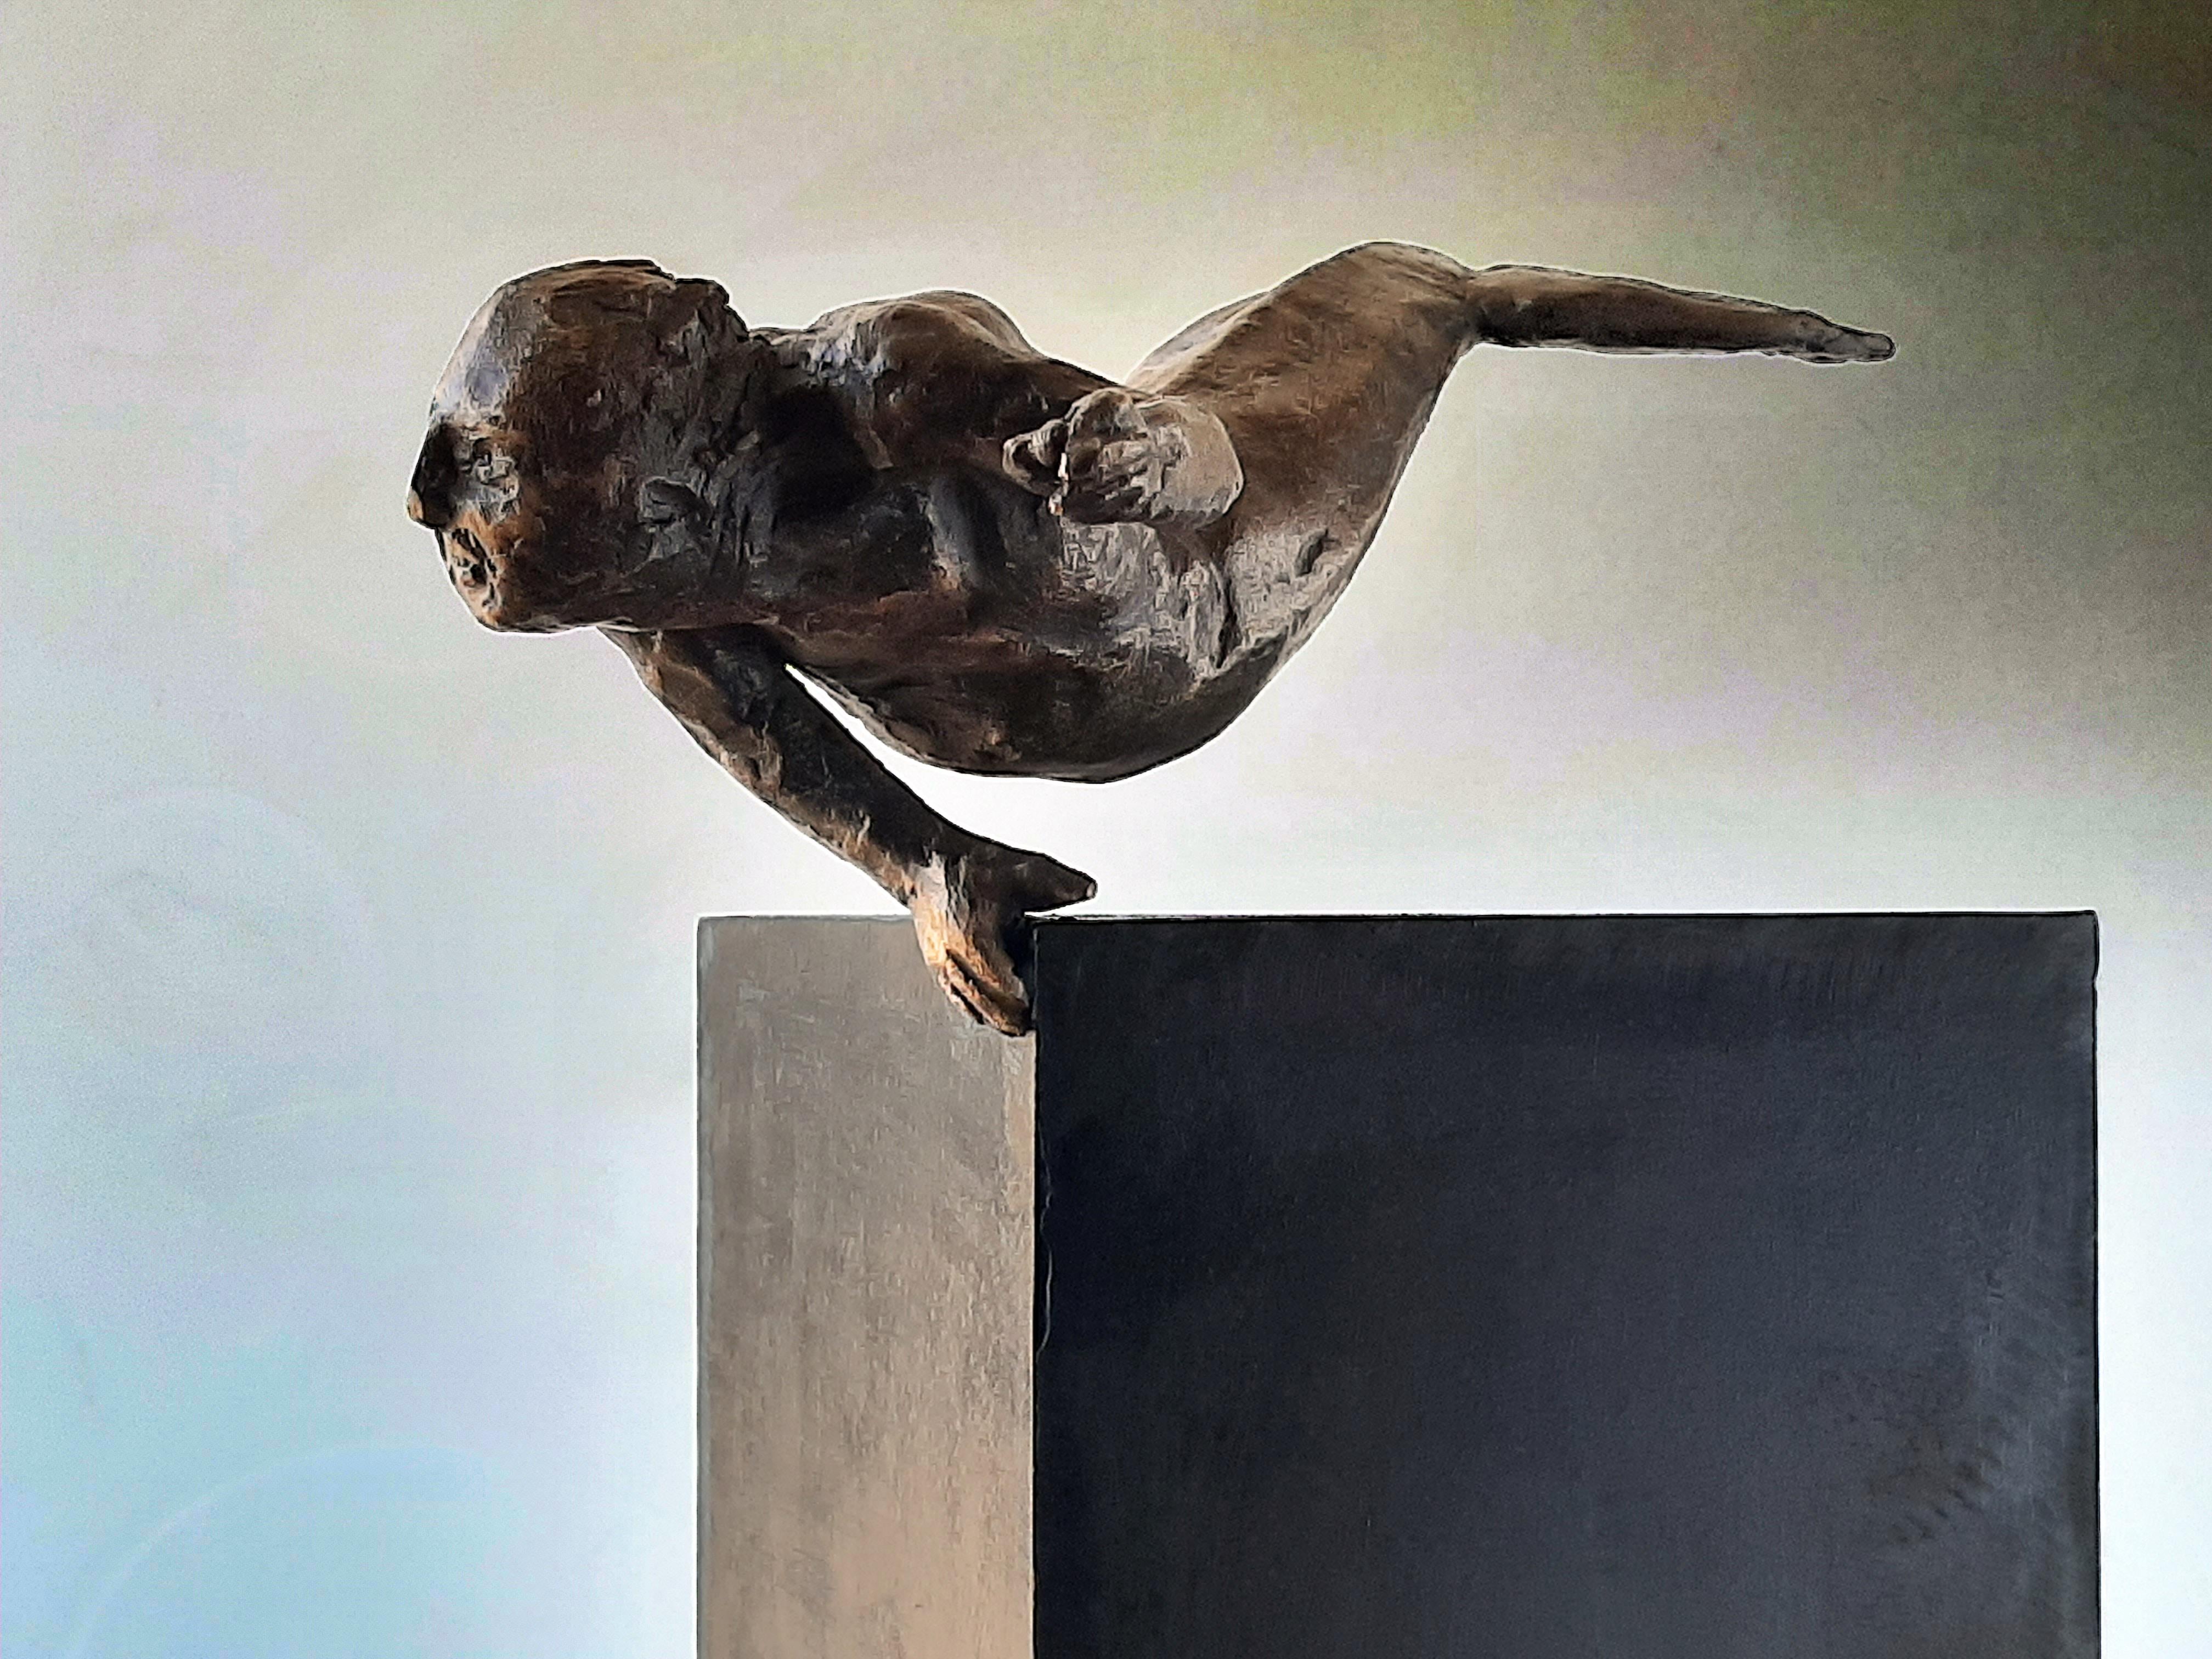 Sculpture by the Spanish artist AMANCIO GONZALEZ
bronze.
Series limited to 25 copies
Fantastic piece of art representing Spanish sculpture
Very popular artist in Europe and Latin America
AMANCIO Gonzalez ( Leon 1965 )

Amancio González is a sculptor